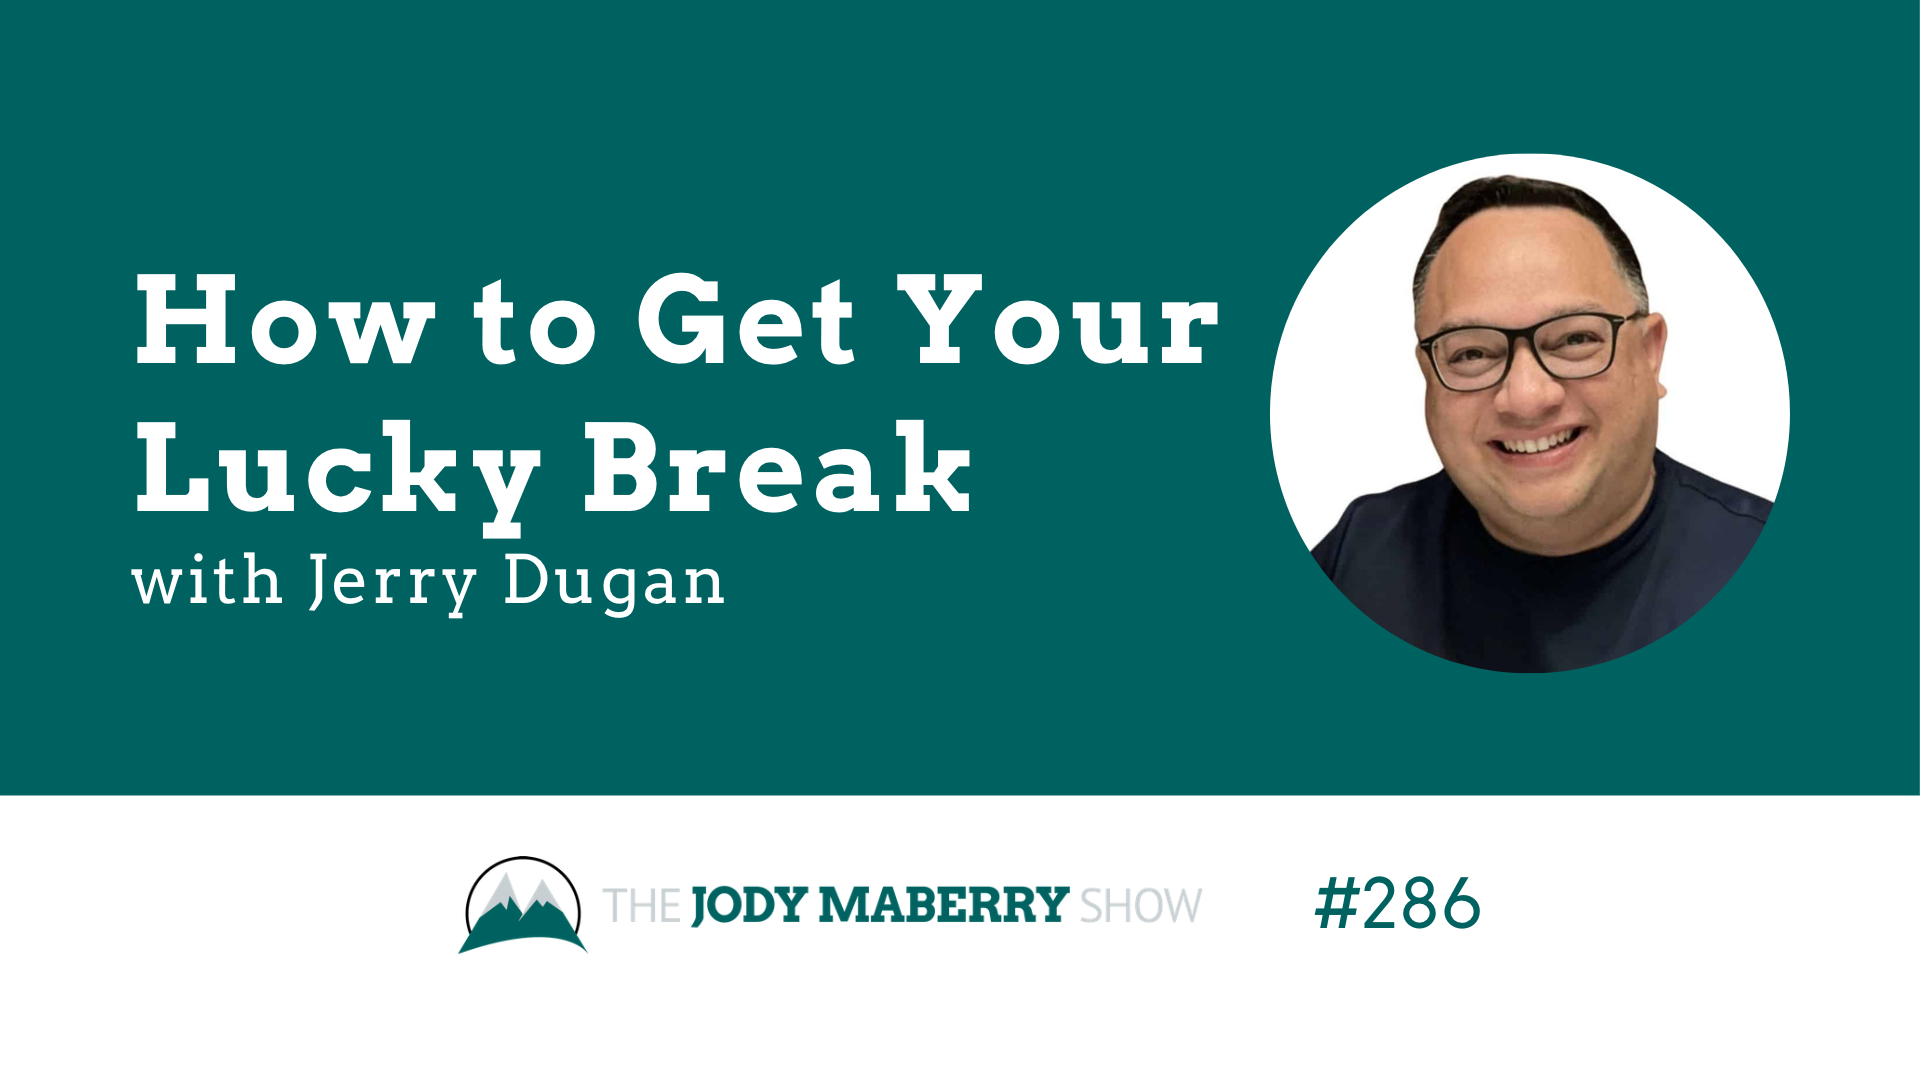 Jody Maberry Show episode 286 How to get your lucky break